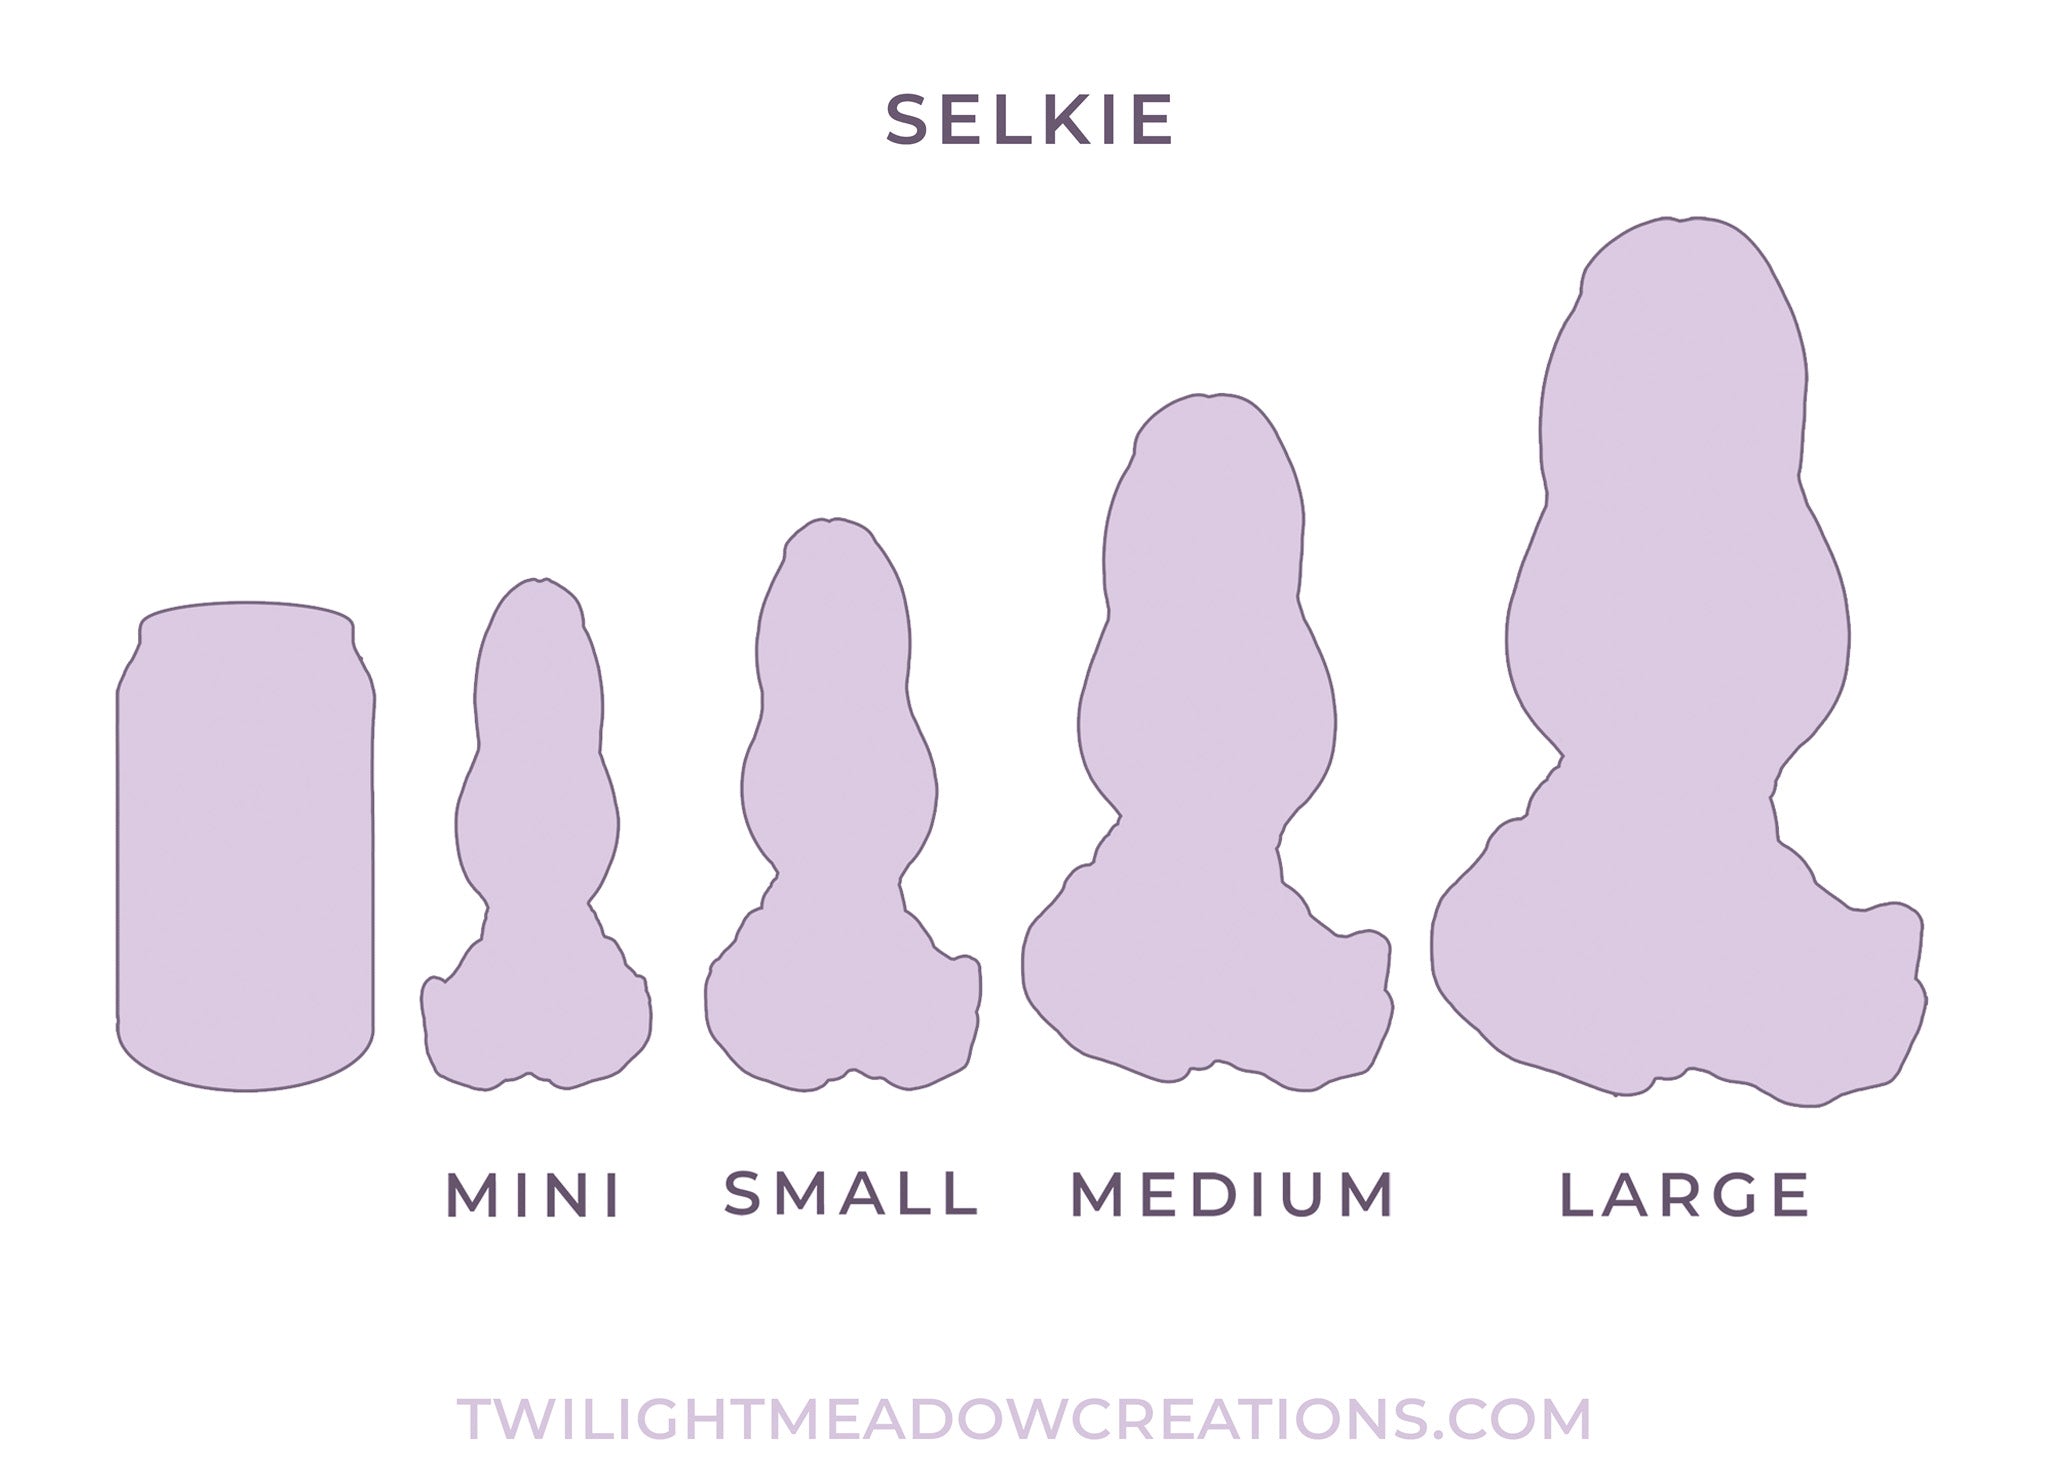 Small Selkie (Firmness: Extra Soft)